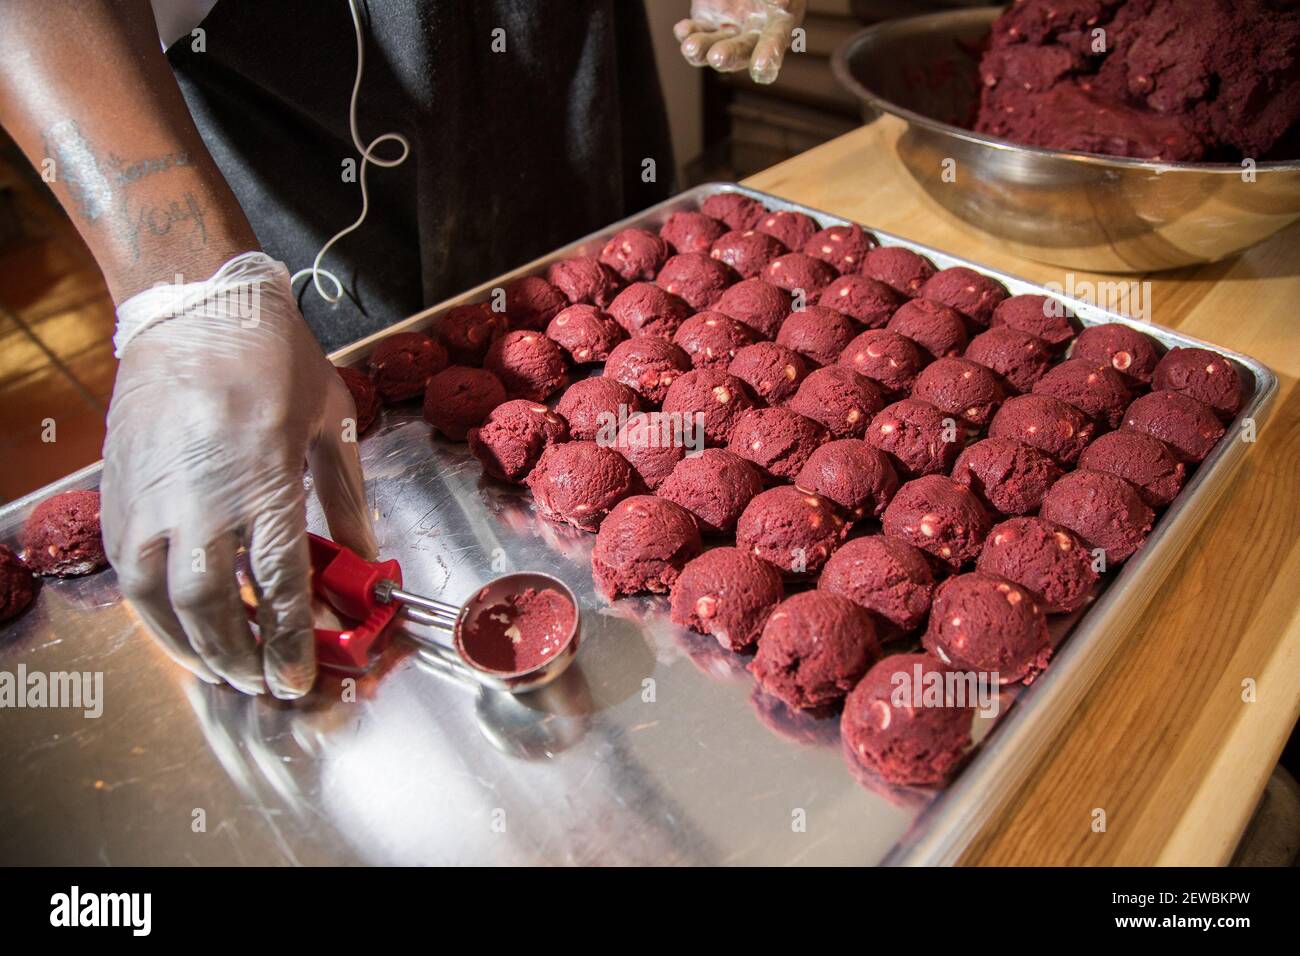 Baker Zobia Courts makes red velvet white chocolate chip cookies at Laine's Bake Shop owned by Rachel Bernier-Green and her husband Jaryd Bernier-Green in Chicago's Morgan Park neighborhood on Friday, Dec. 8, 2017. (Photo by Zbigniew Bzdak/Chicago Tribune/TNS/Sipa USA) Stock Photo